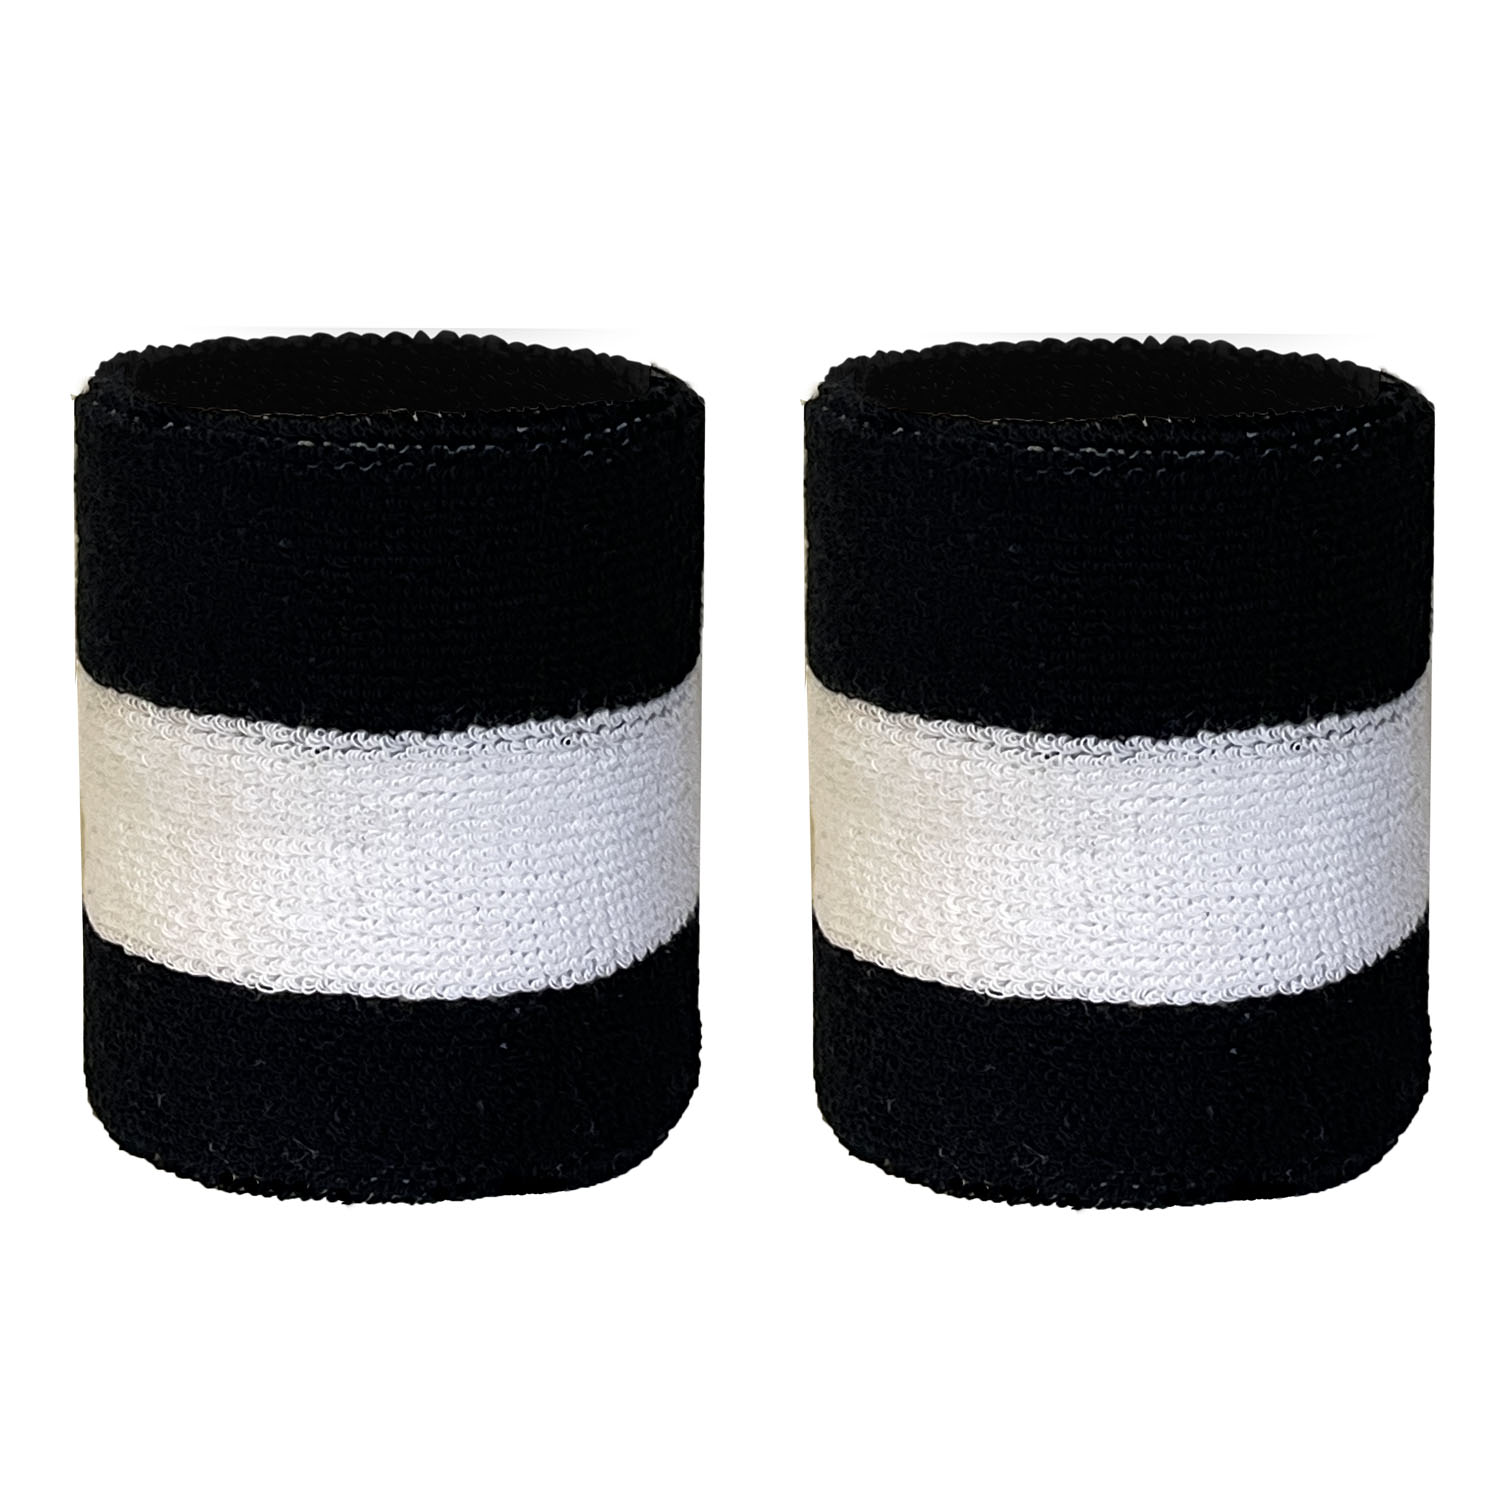 White with Black Striped Quality Wristbands, 1 Pair